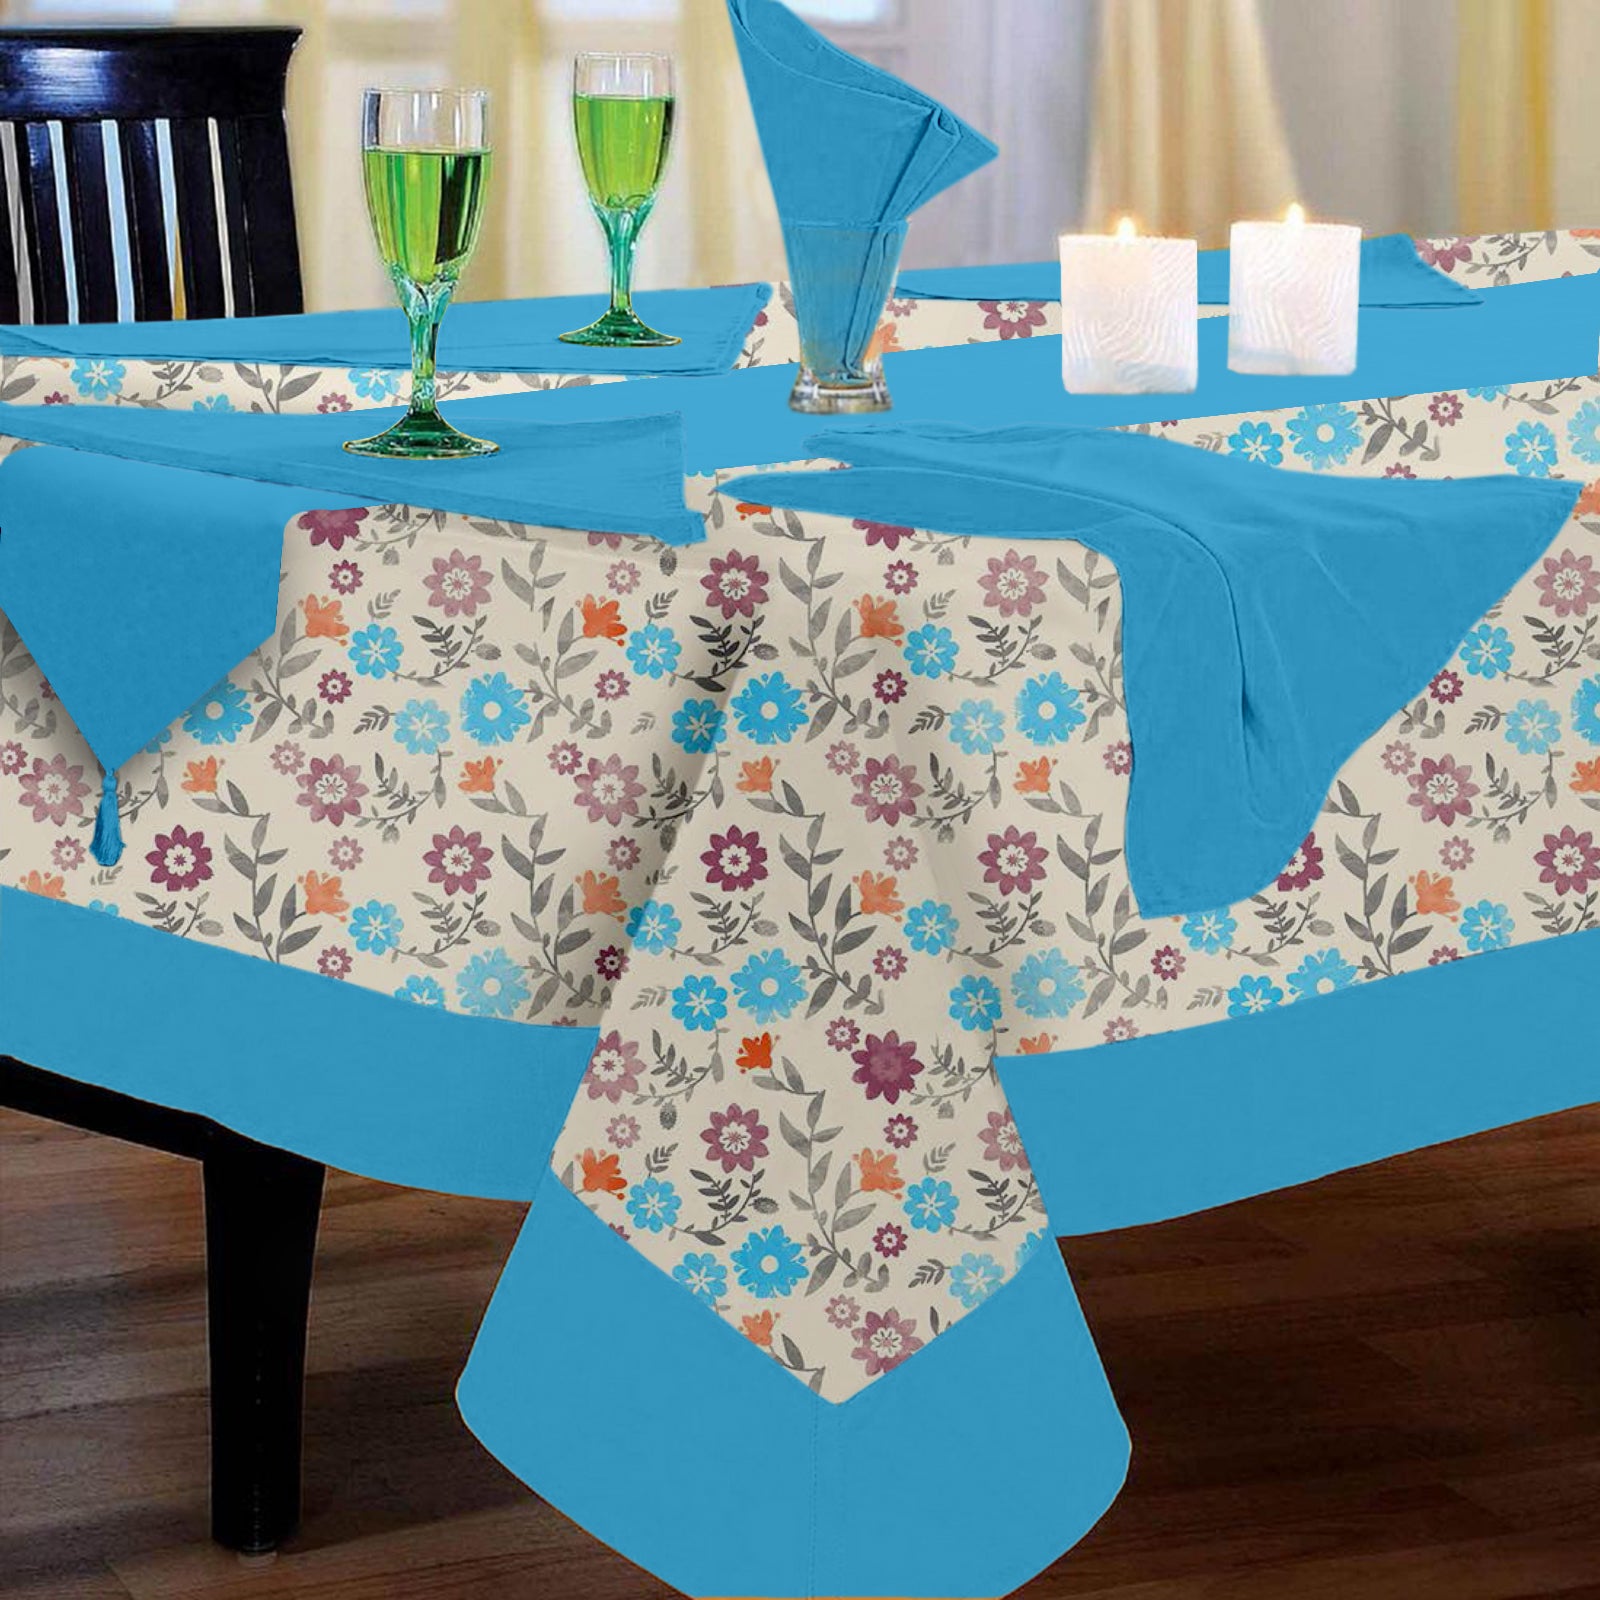 Lushomes dining table cover 6 seater set, Flower Printed 6 Seater Small Cotton Table Linen Set, Home decor (1 Table Cloth 54 x 78 inch + 1 Runner in Size 12x90 Inch  + 6 Napkins in Size 17x17 Inch)